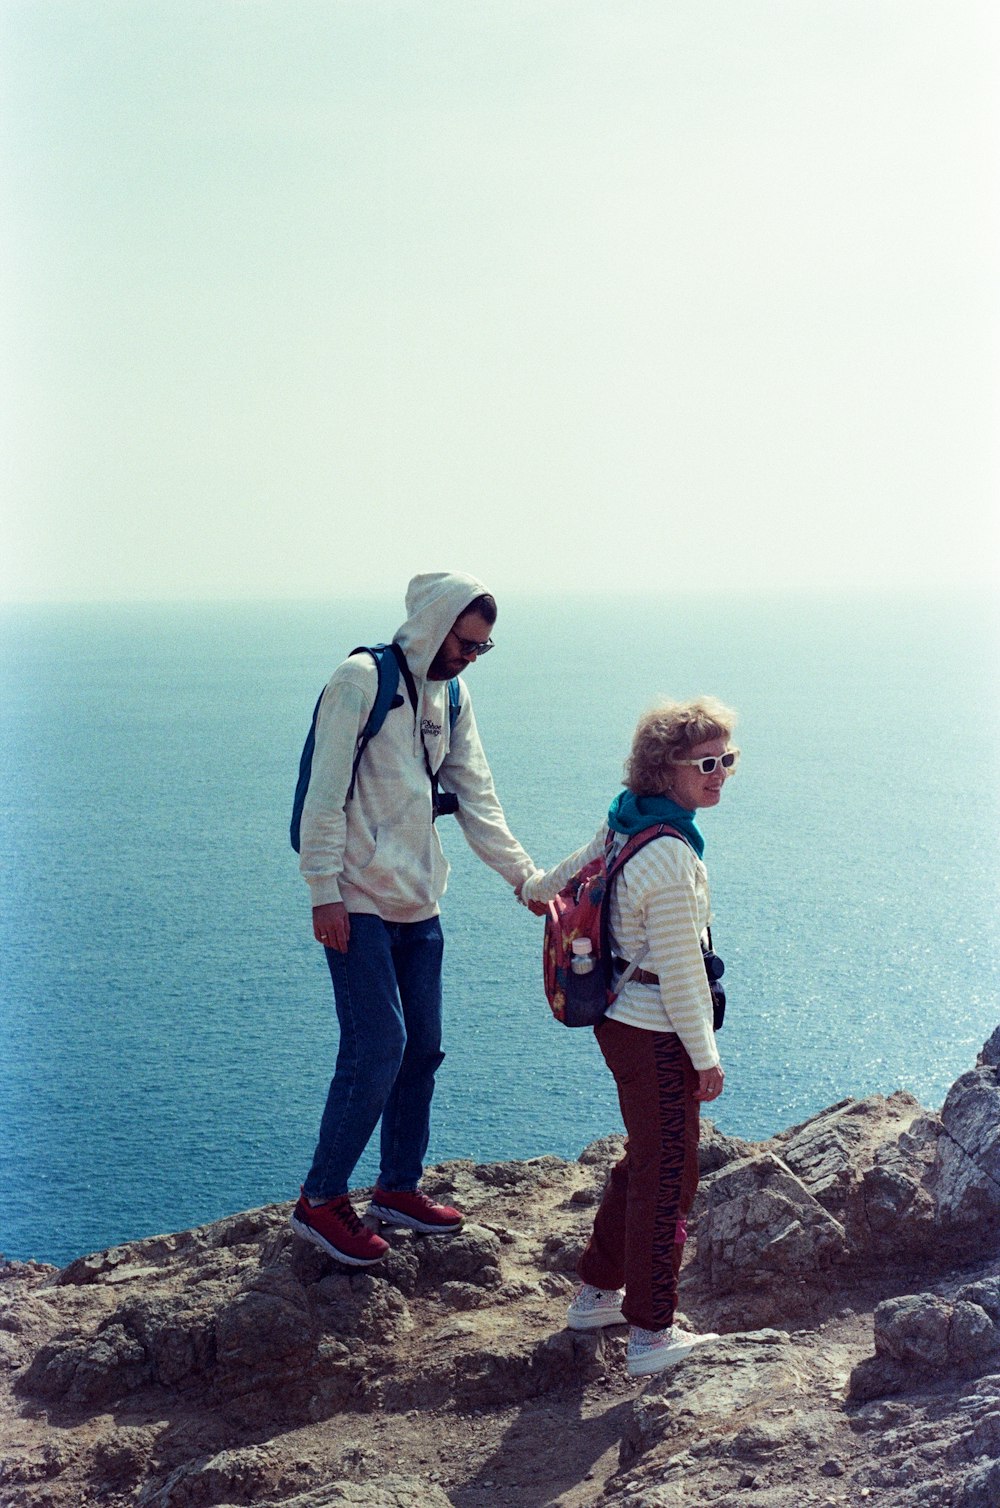 a man and woman standing on a rocky cliff overlooking the ocean